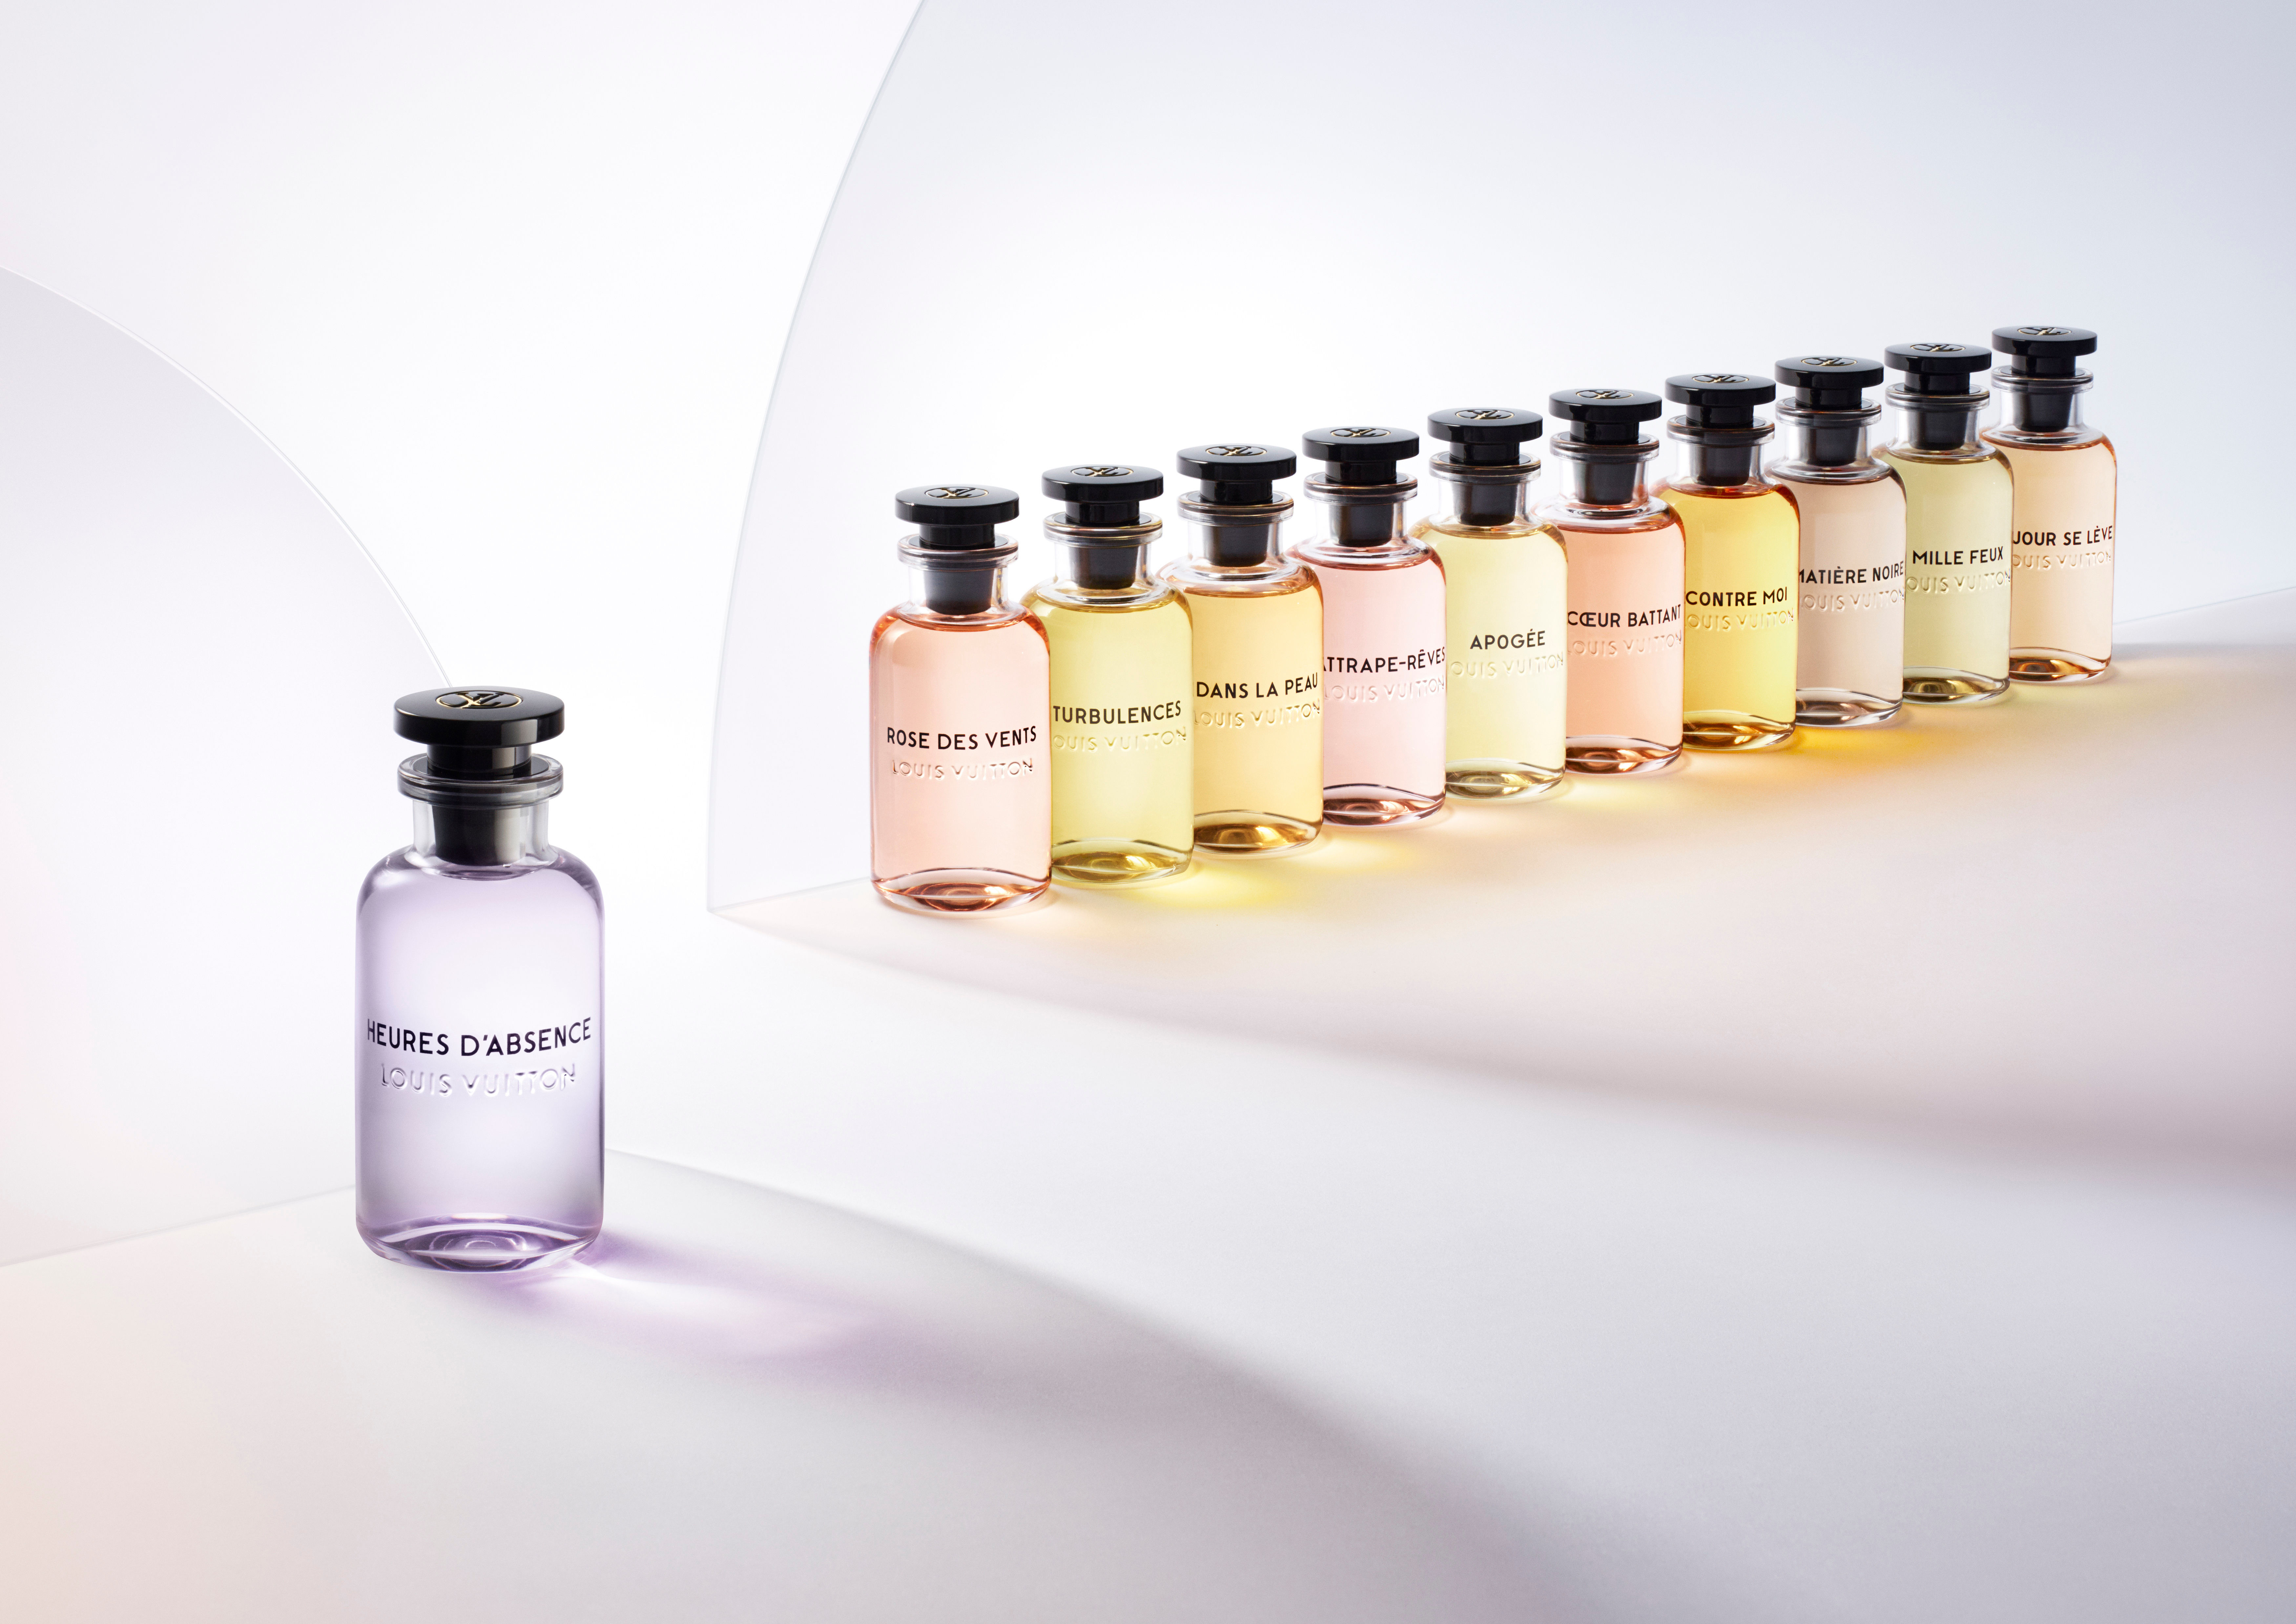 Louis Vuitton recreates the iconic Heures D’Absence scent